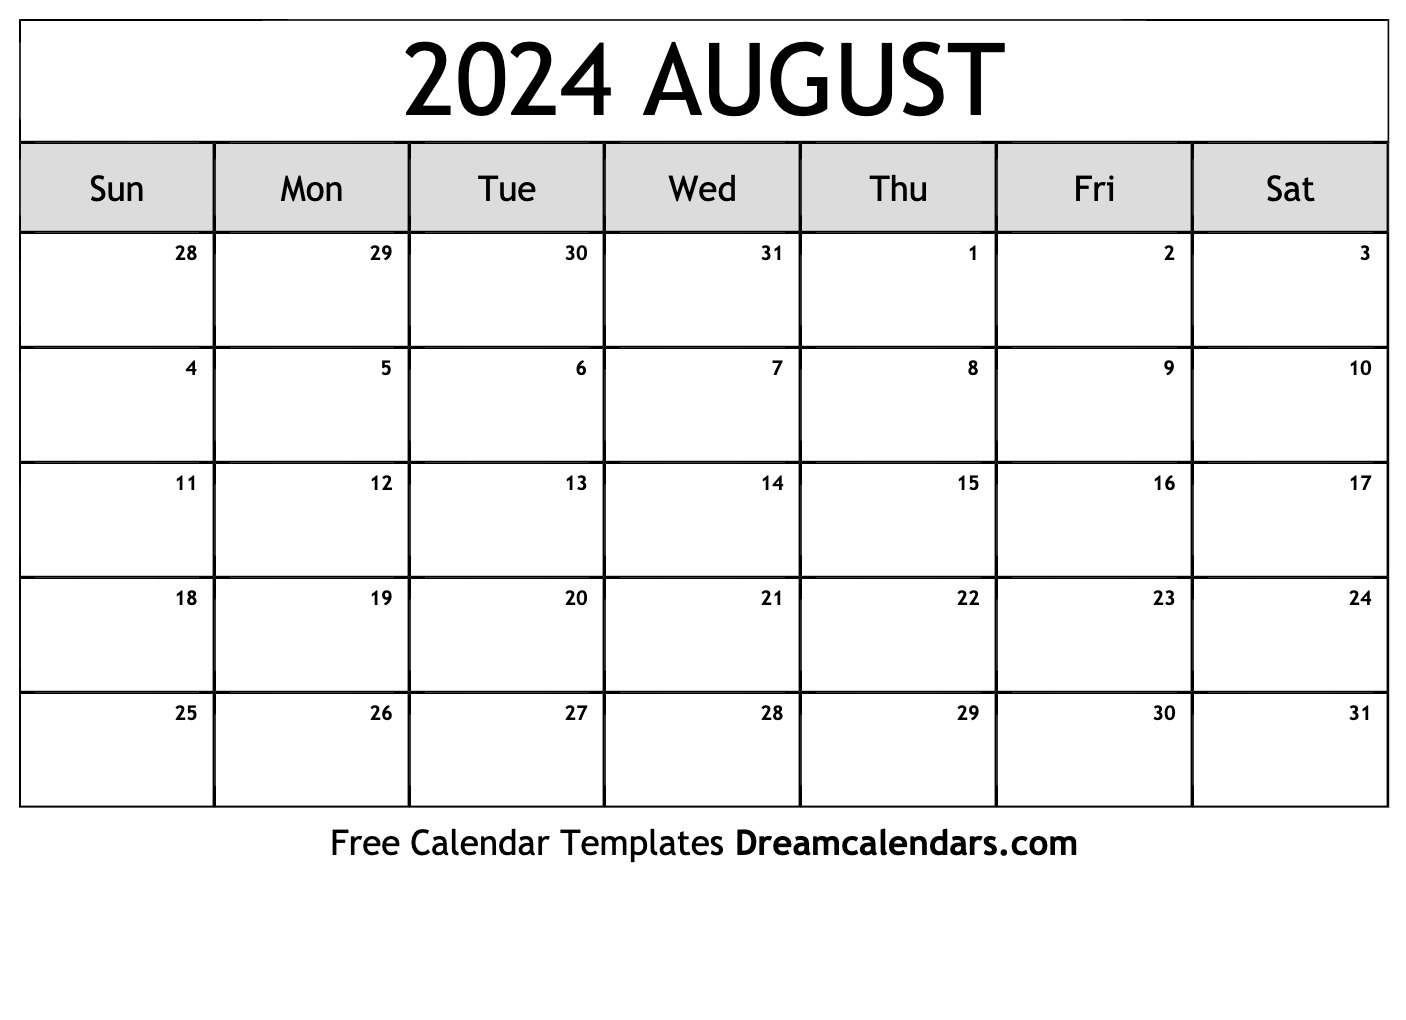 August 2024 Calendar | Free Blank Printable With Holidays for August Free Printable Calendar 2024